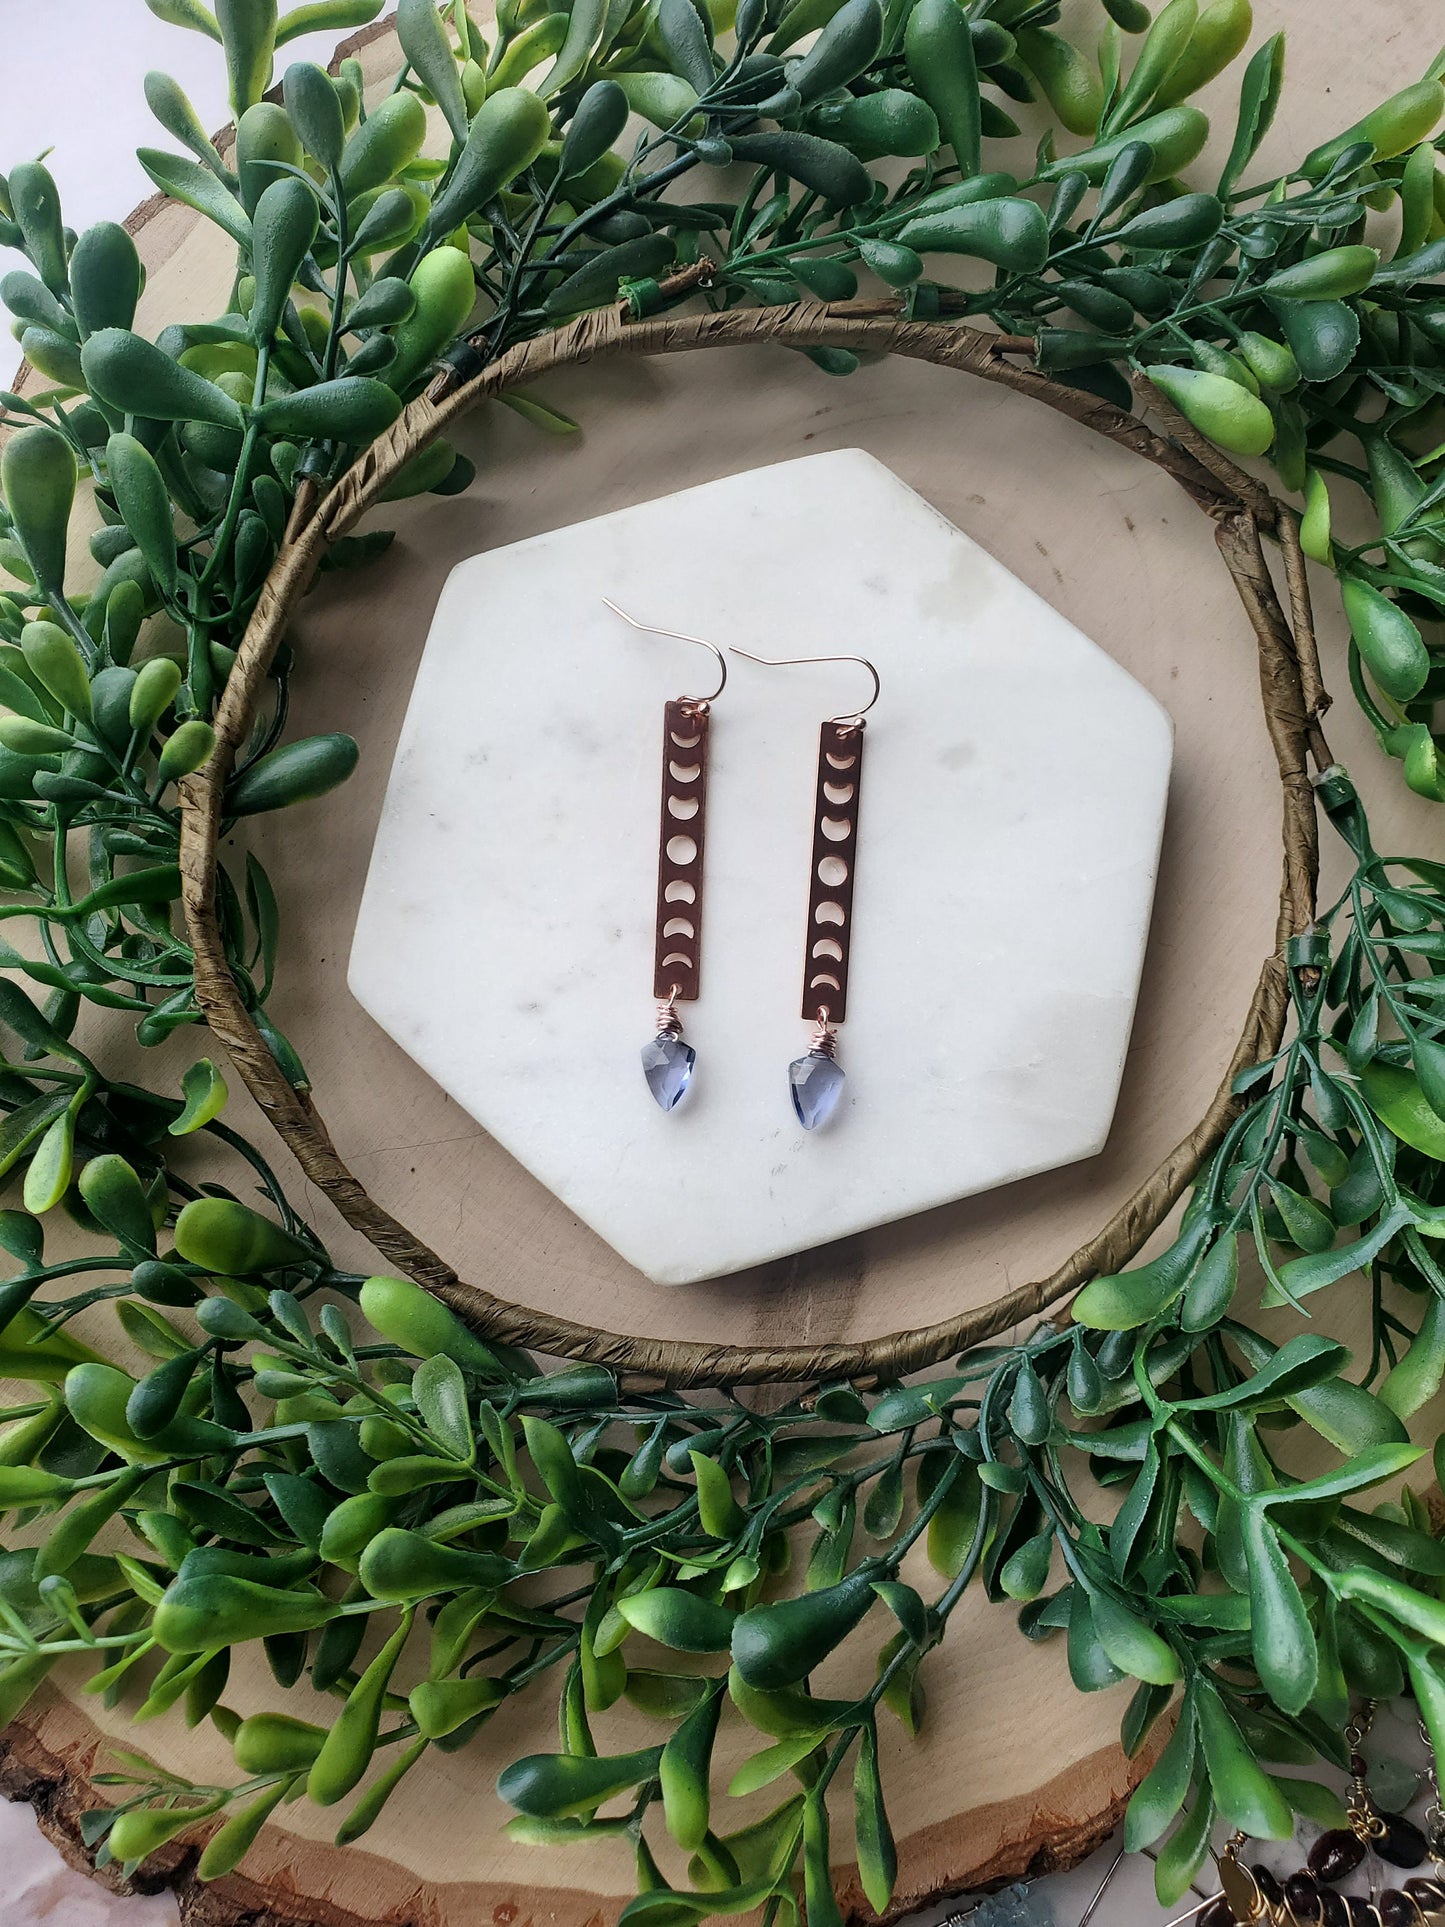 Copper Moon Phase Earrings with Tanzanite Quartz